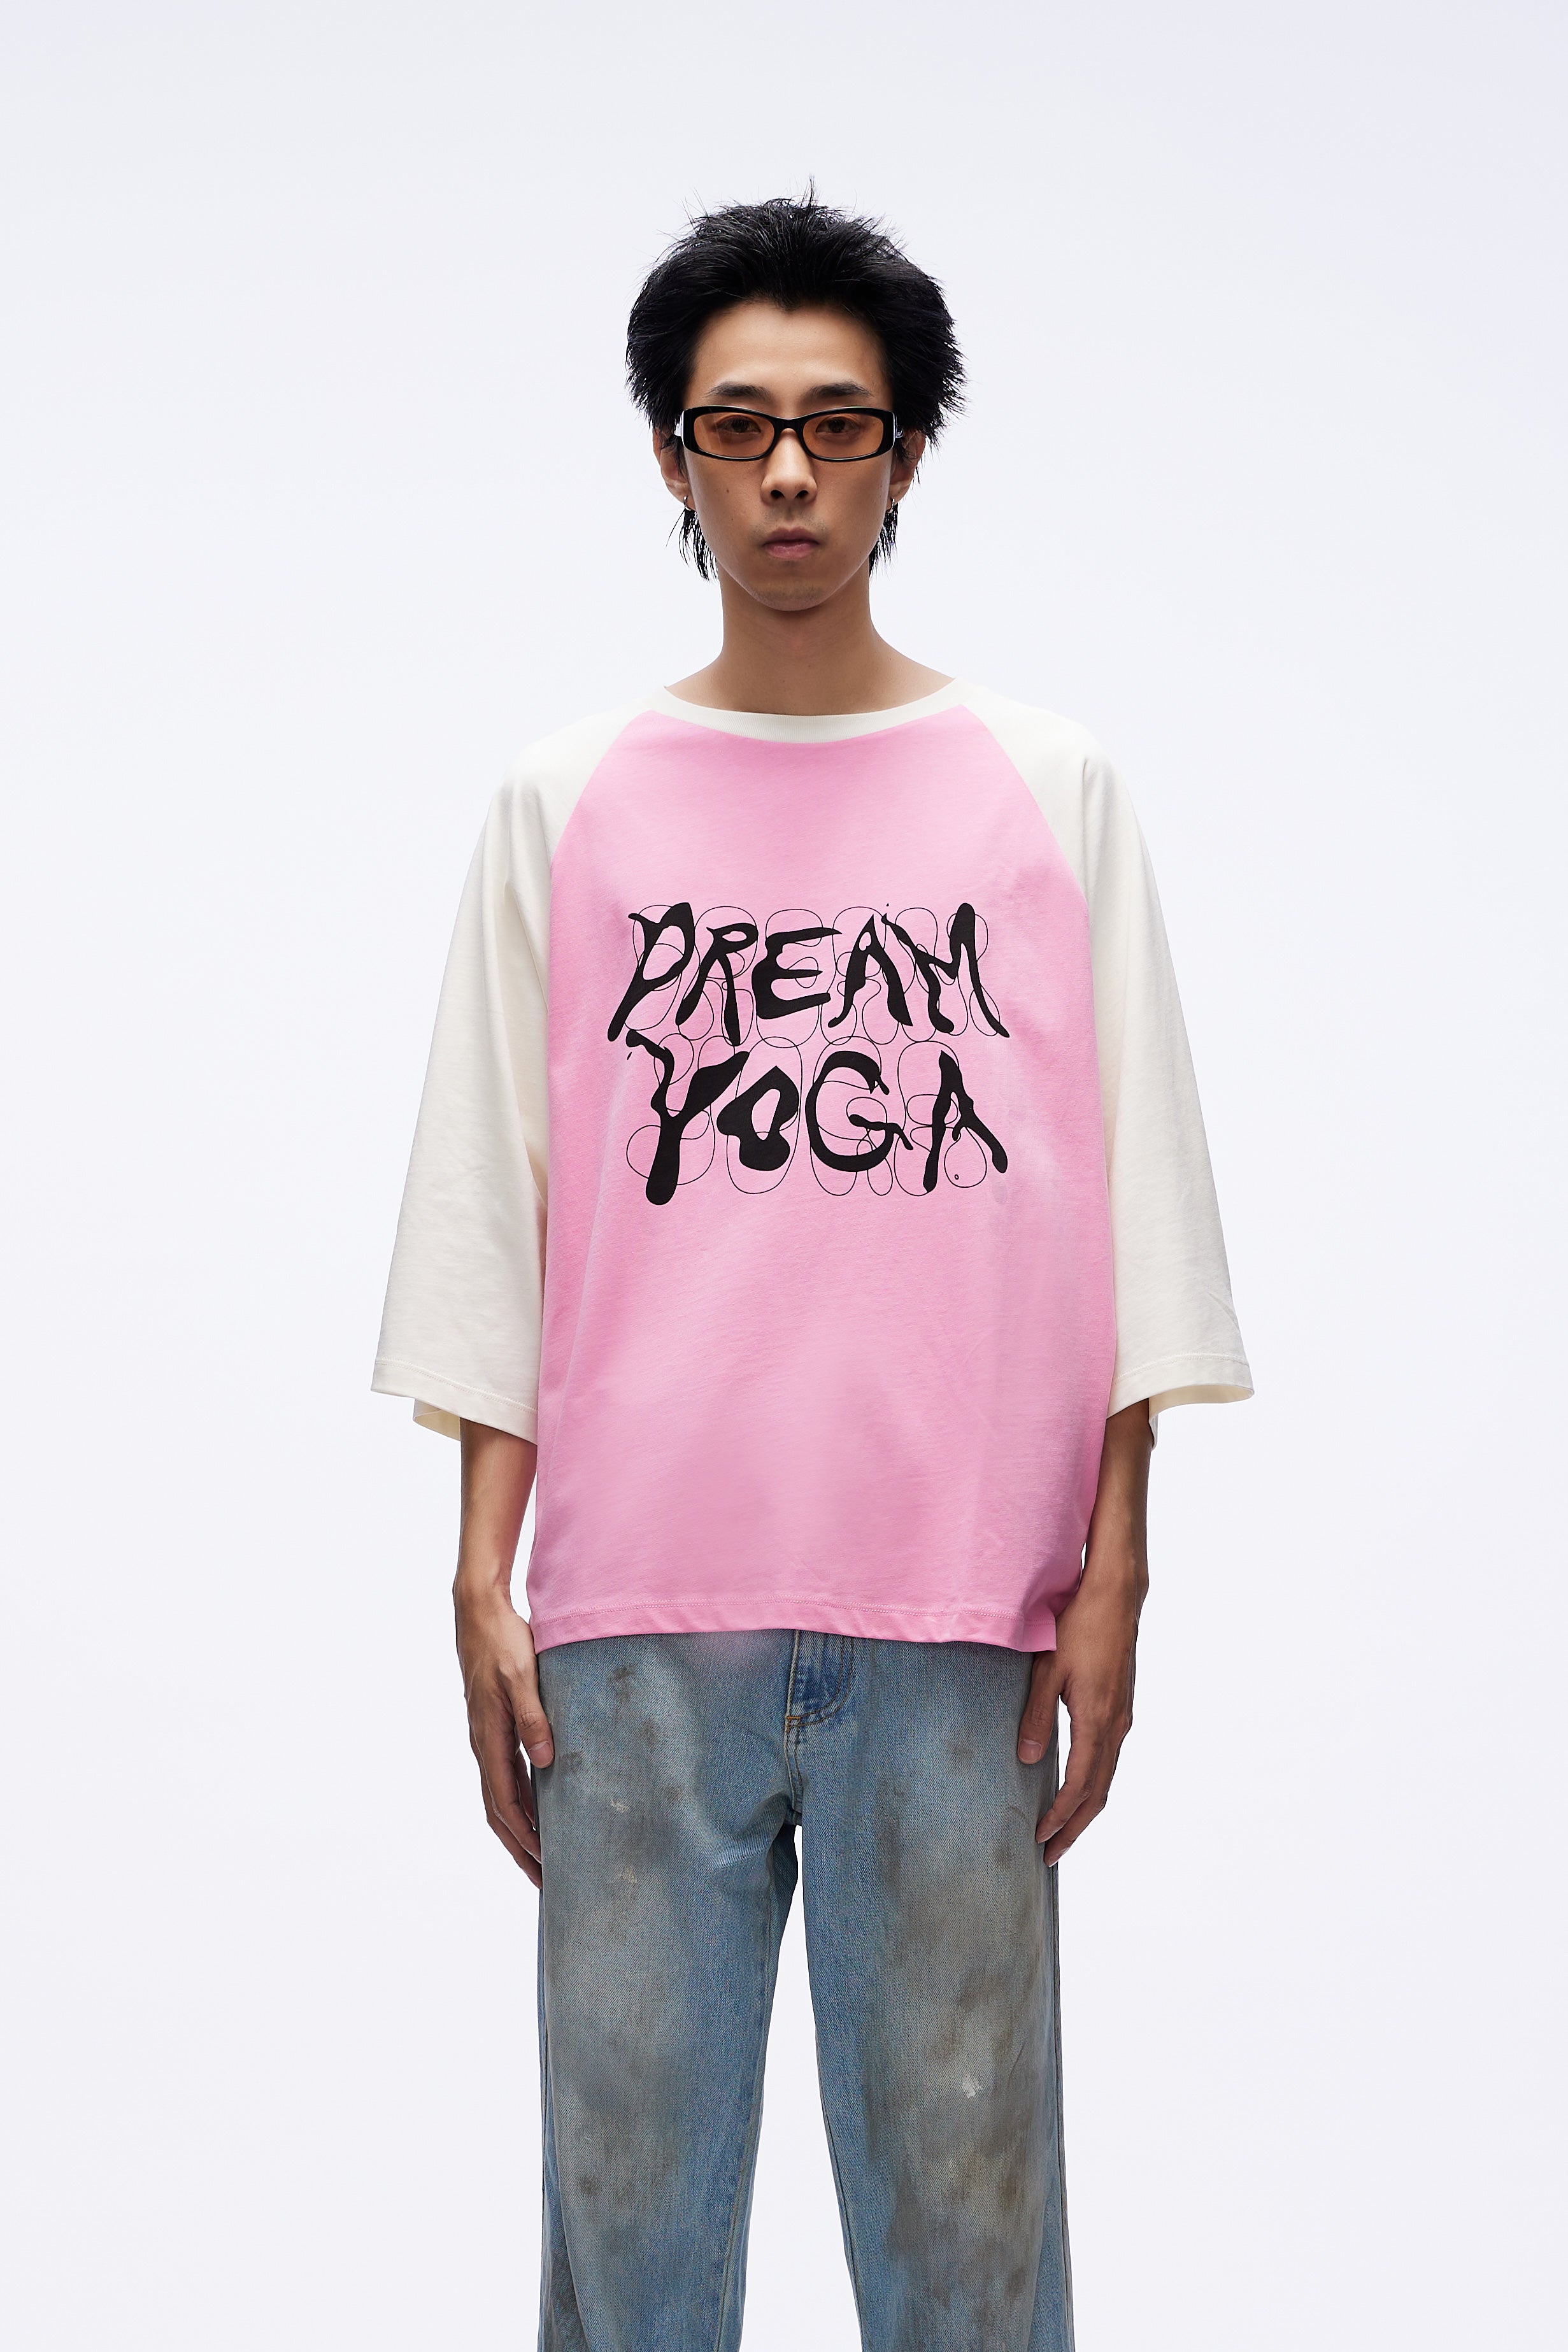 Unisex Dream Yoga Tshirt Knit Pink Liberal Youth Ministry